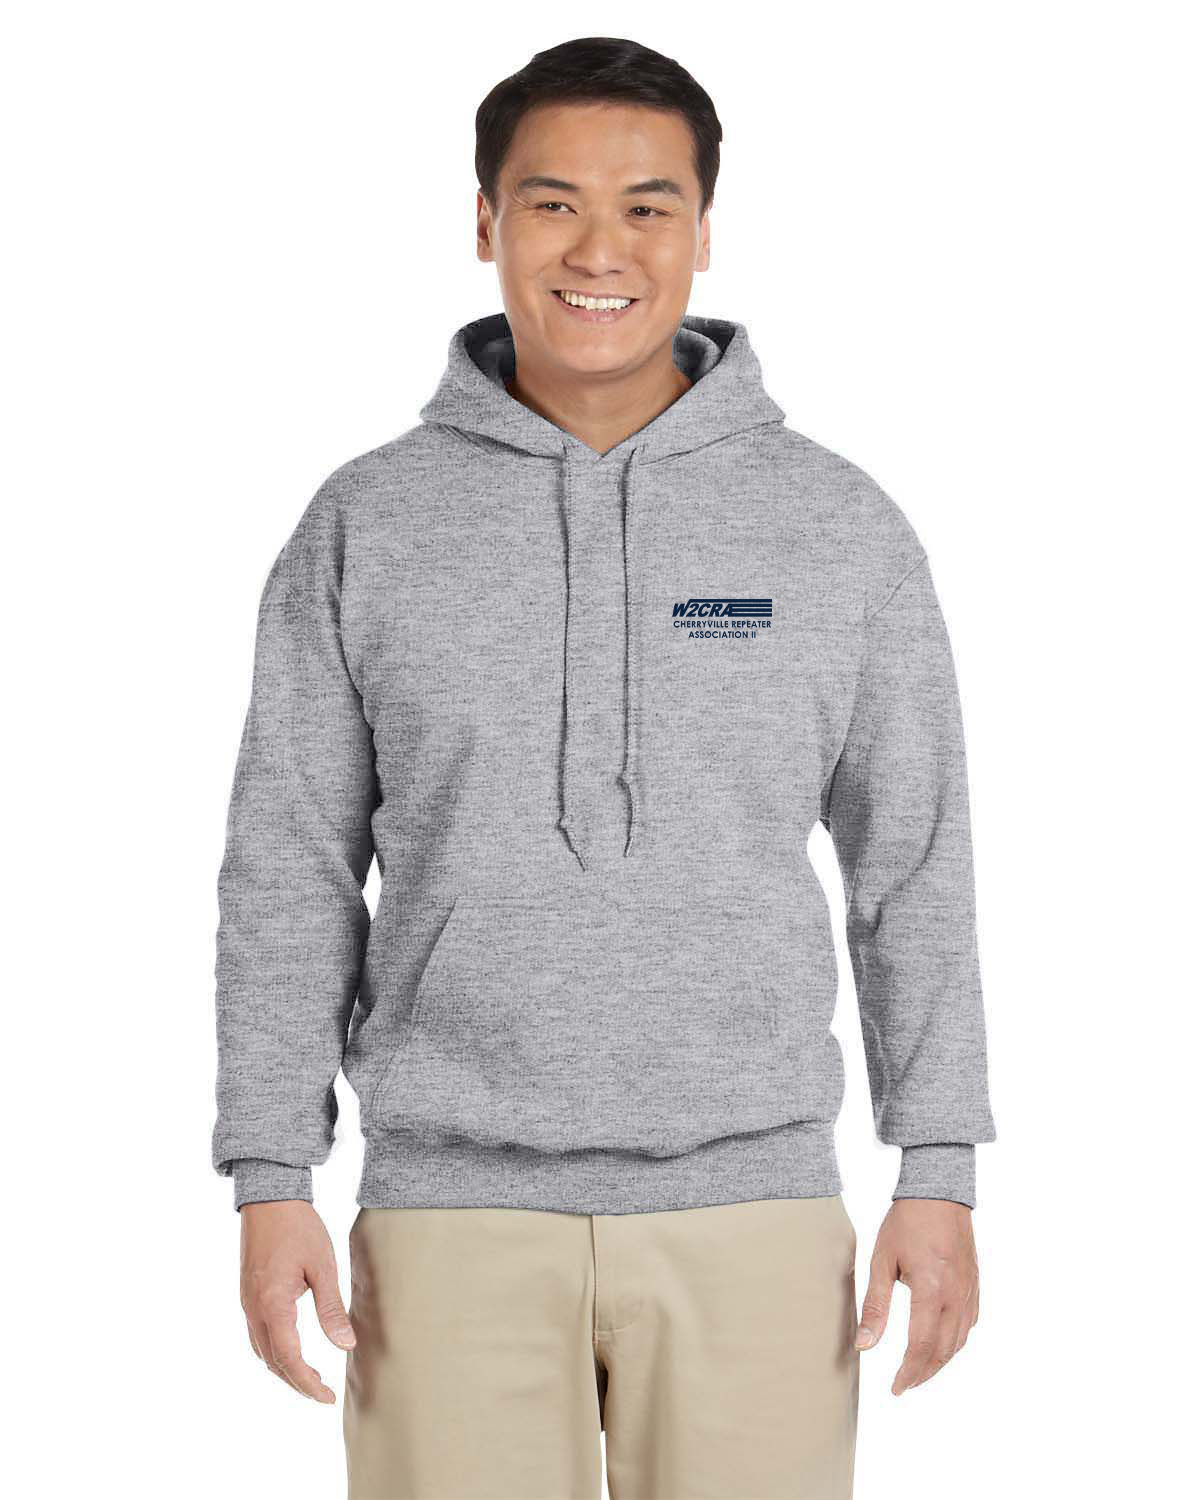 KSS185 Sport Grey Hoodie with Navy Logo on Left Chest and Back Print